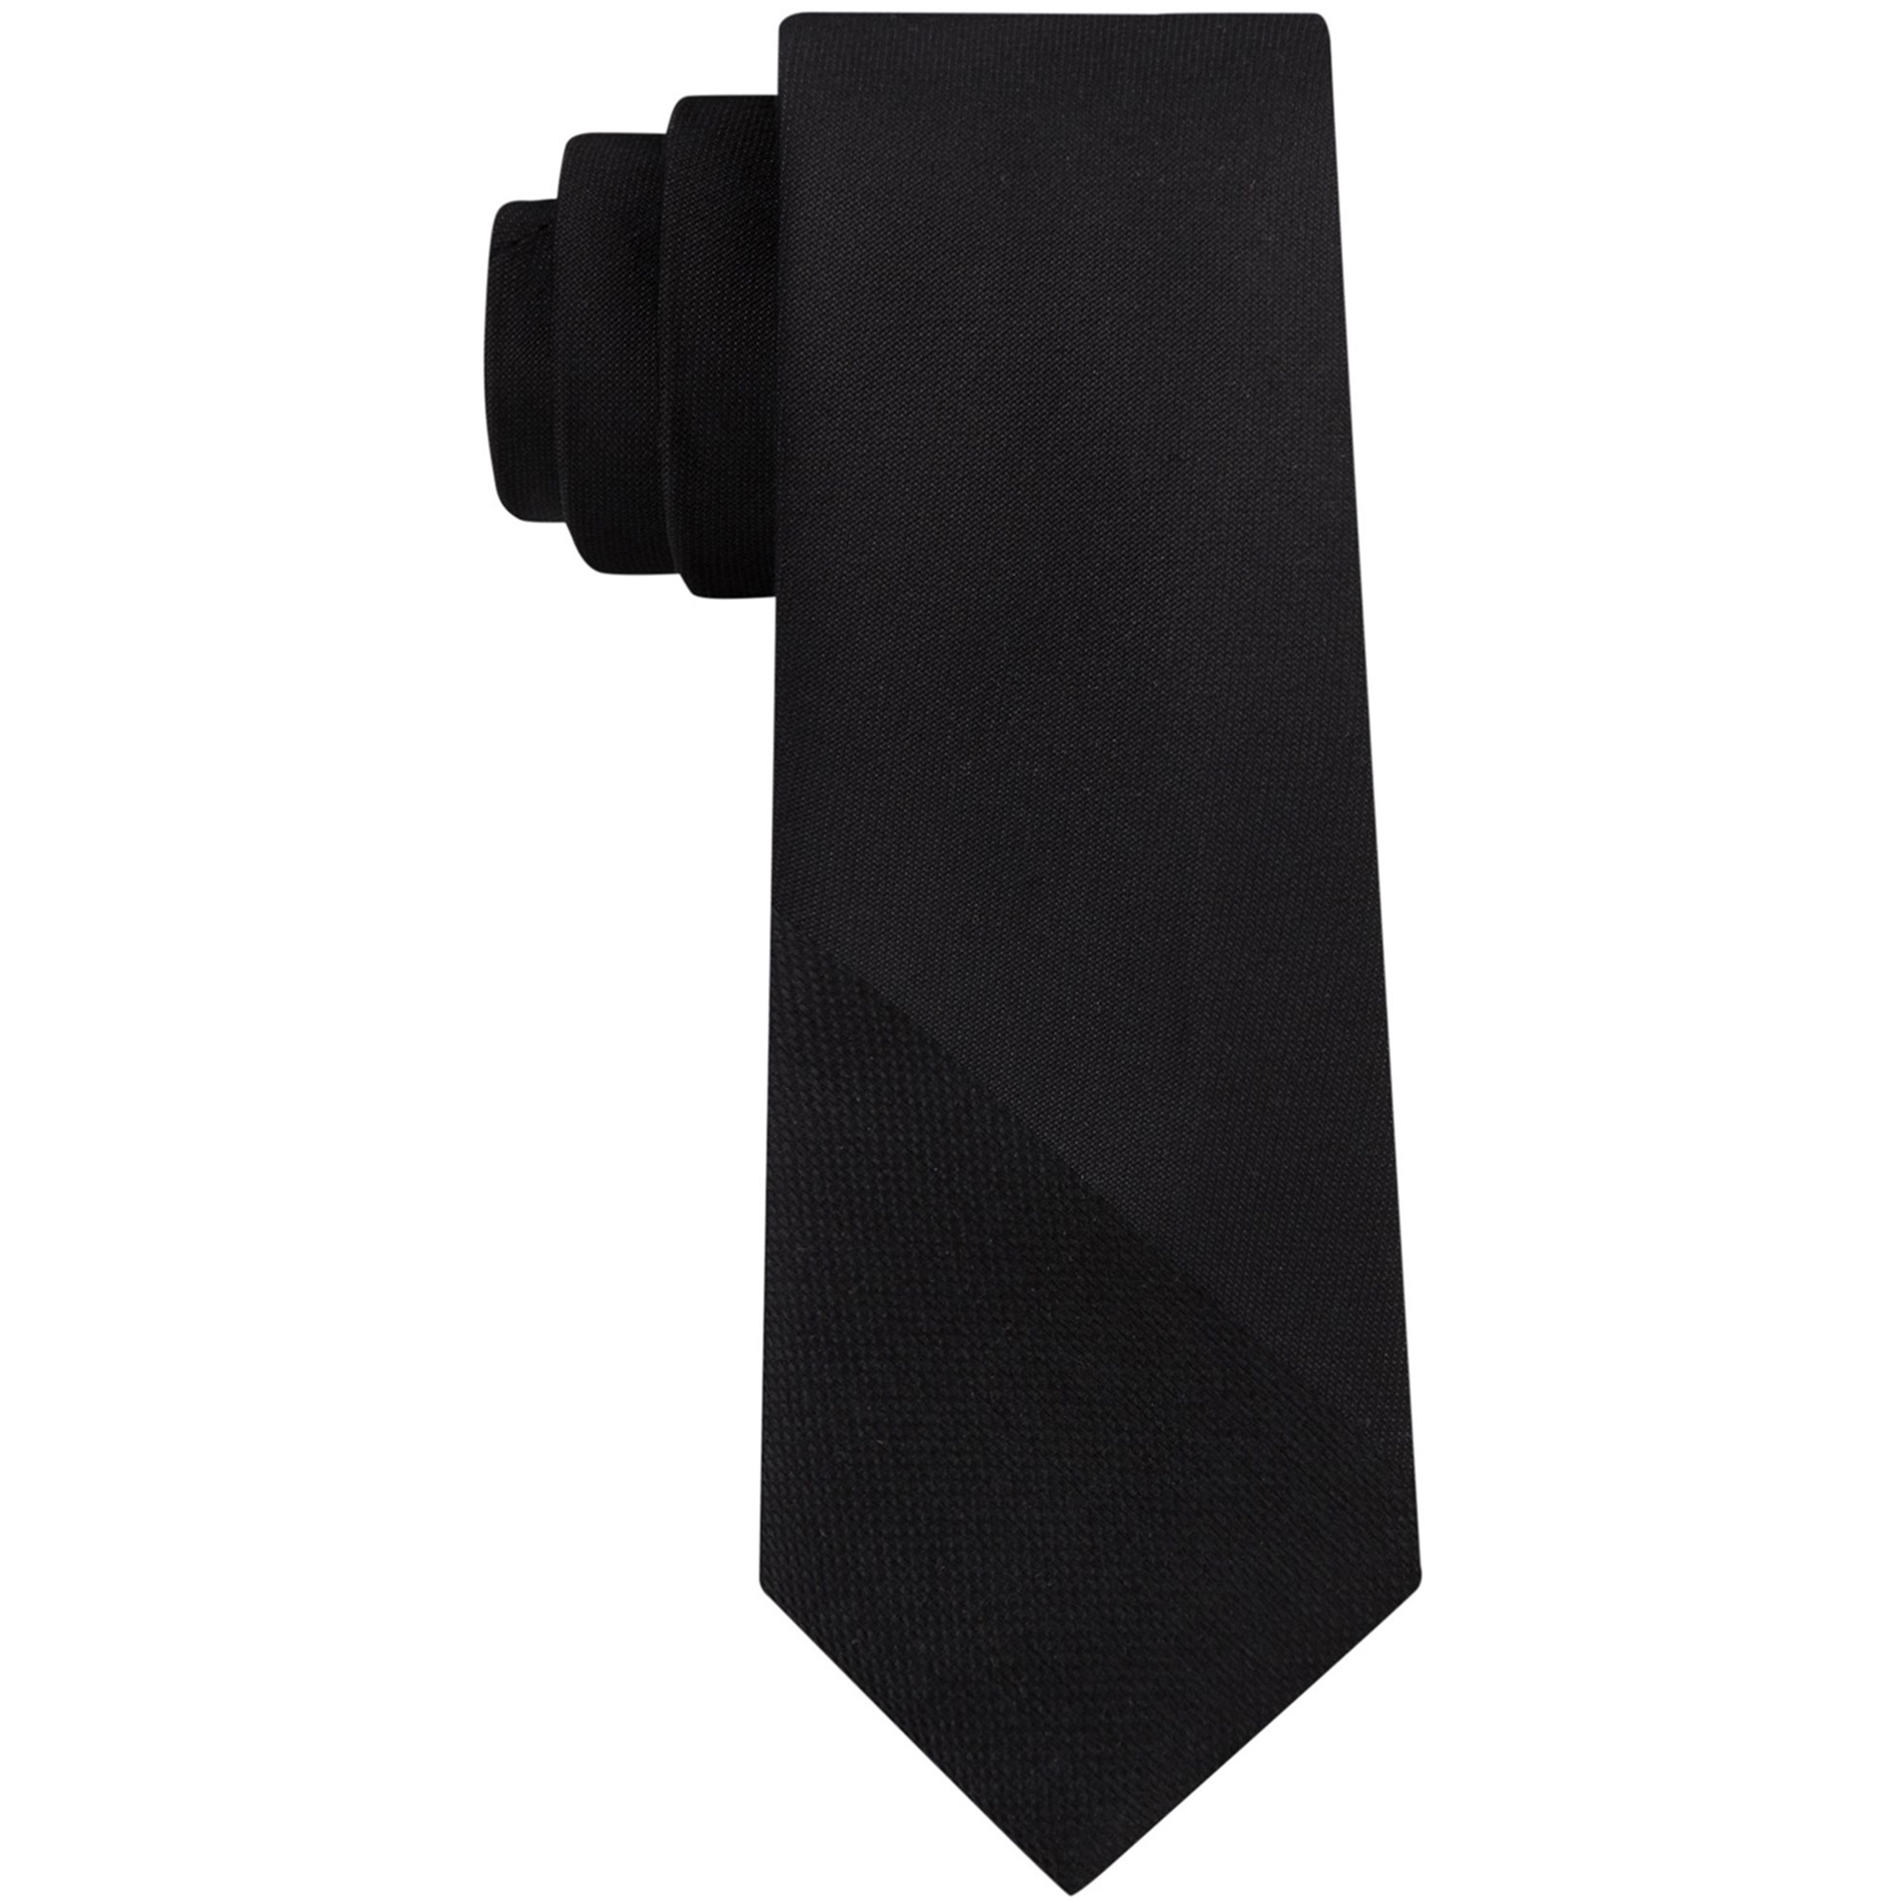 Dkny Mens Textured Angle Self-Tied Necktie